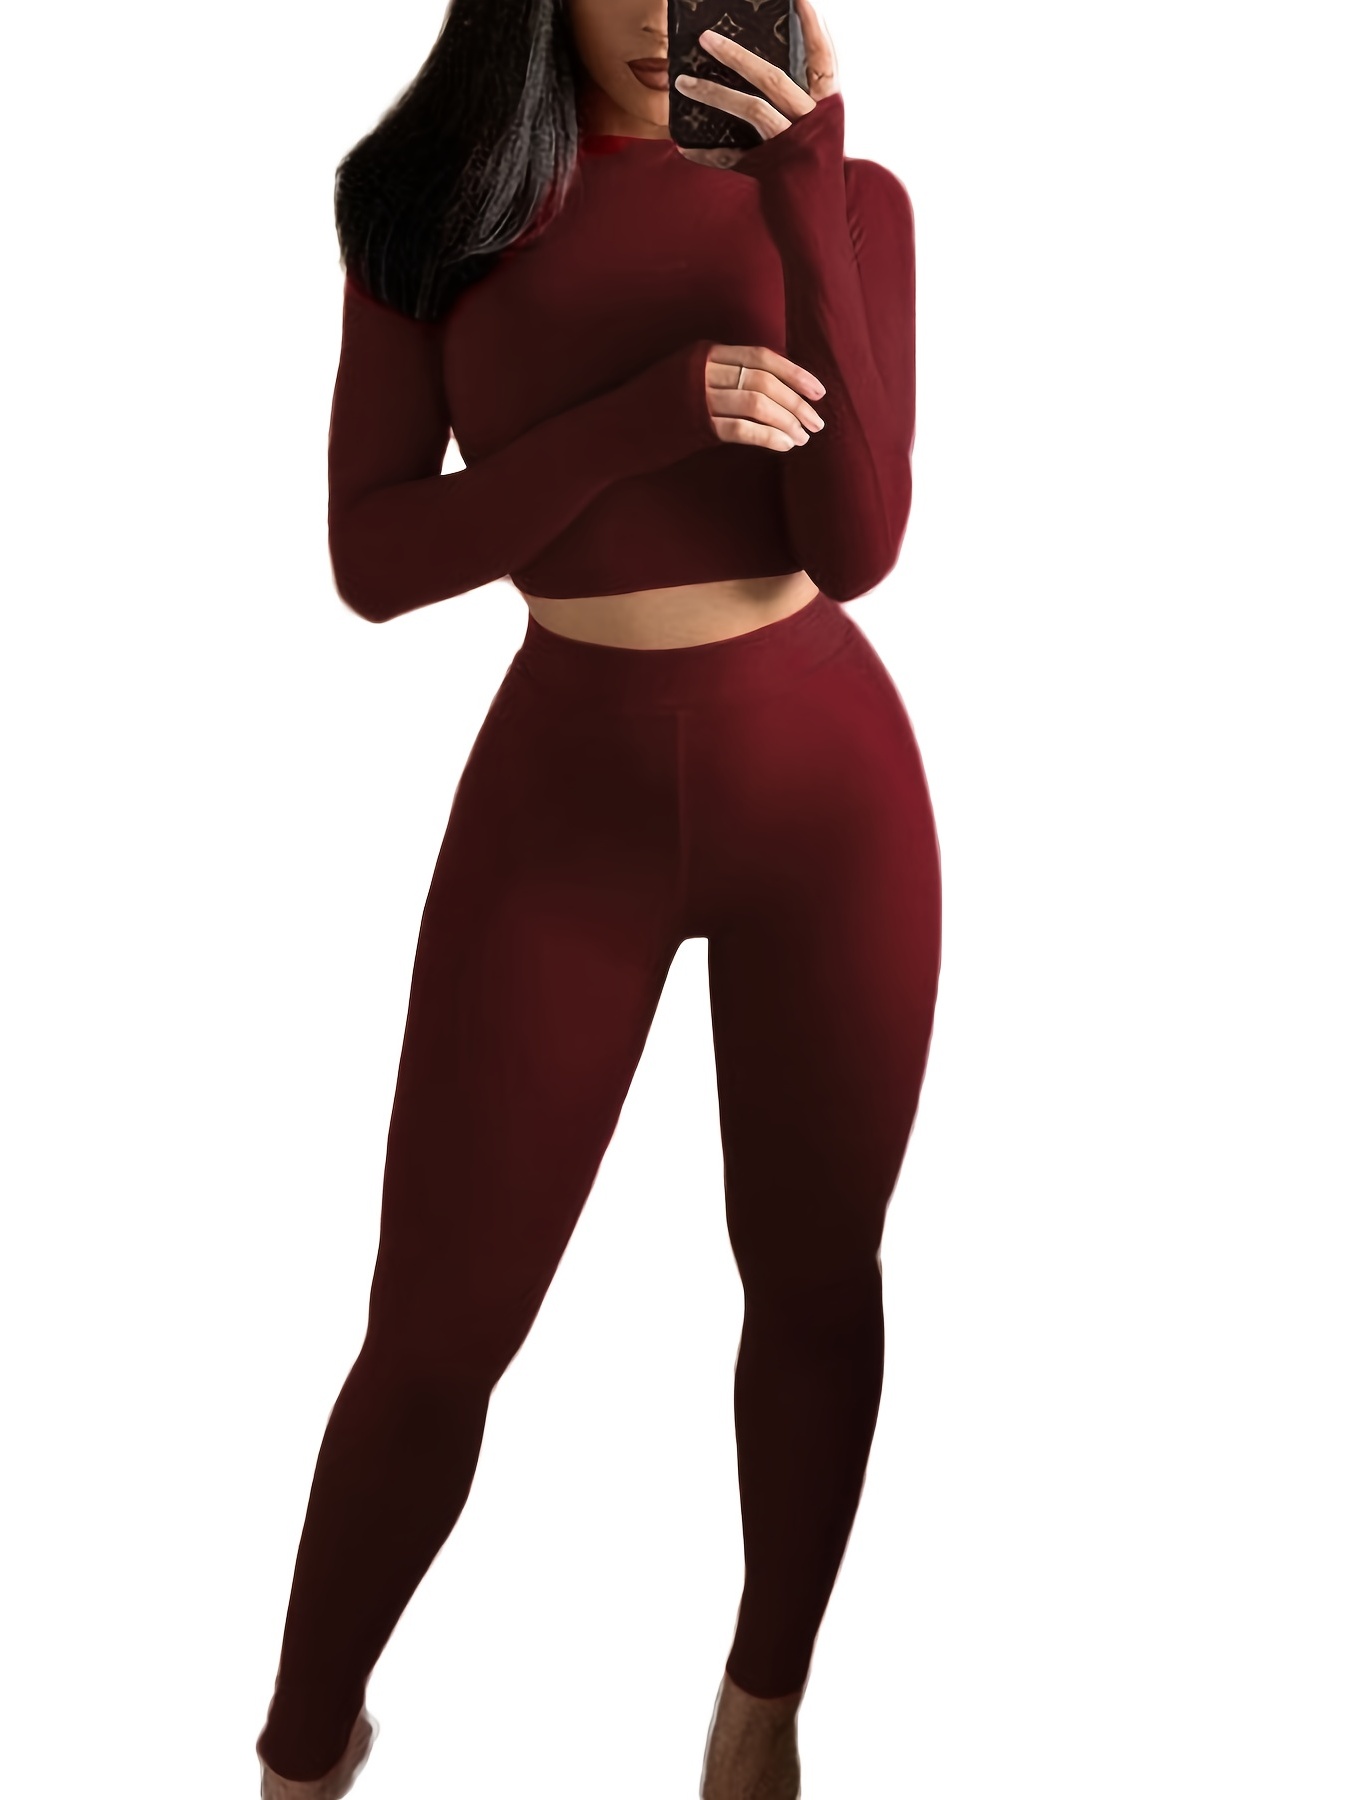 Living Room Flow Matching High Waist Stretchy Crop Top And Legging Set –  Merle + Paz